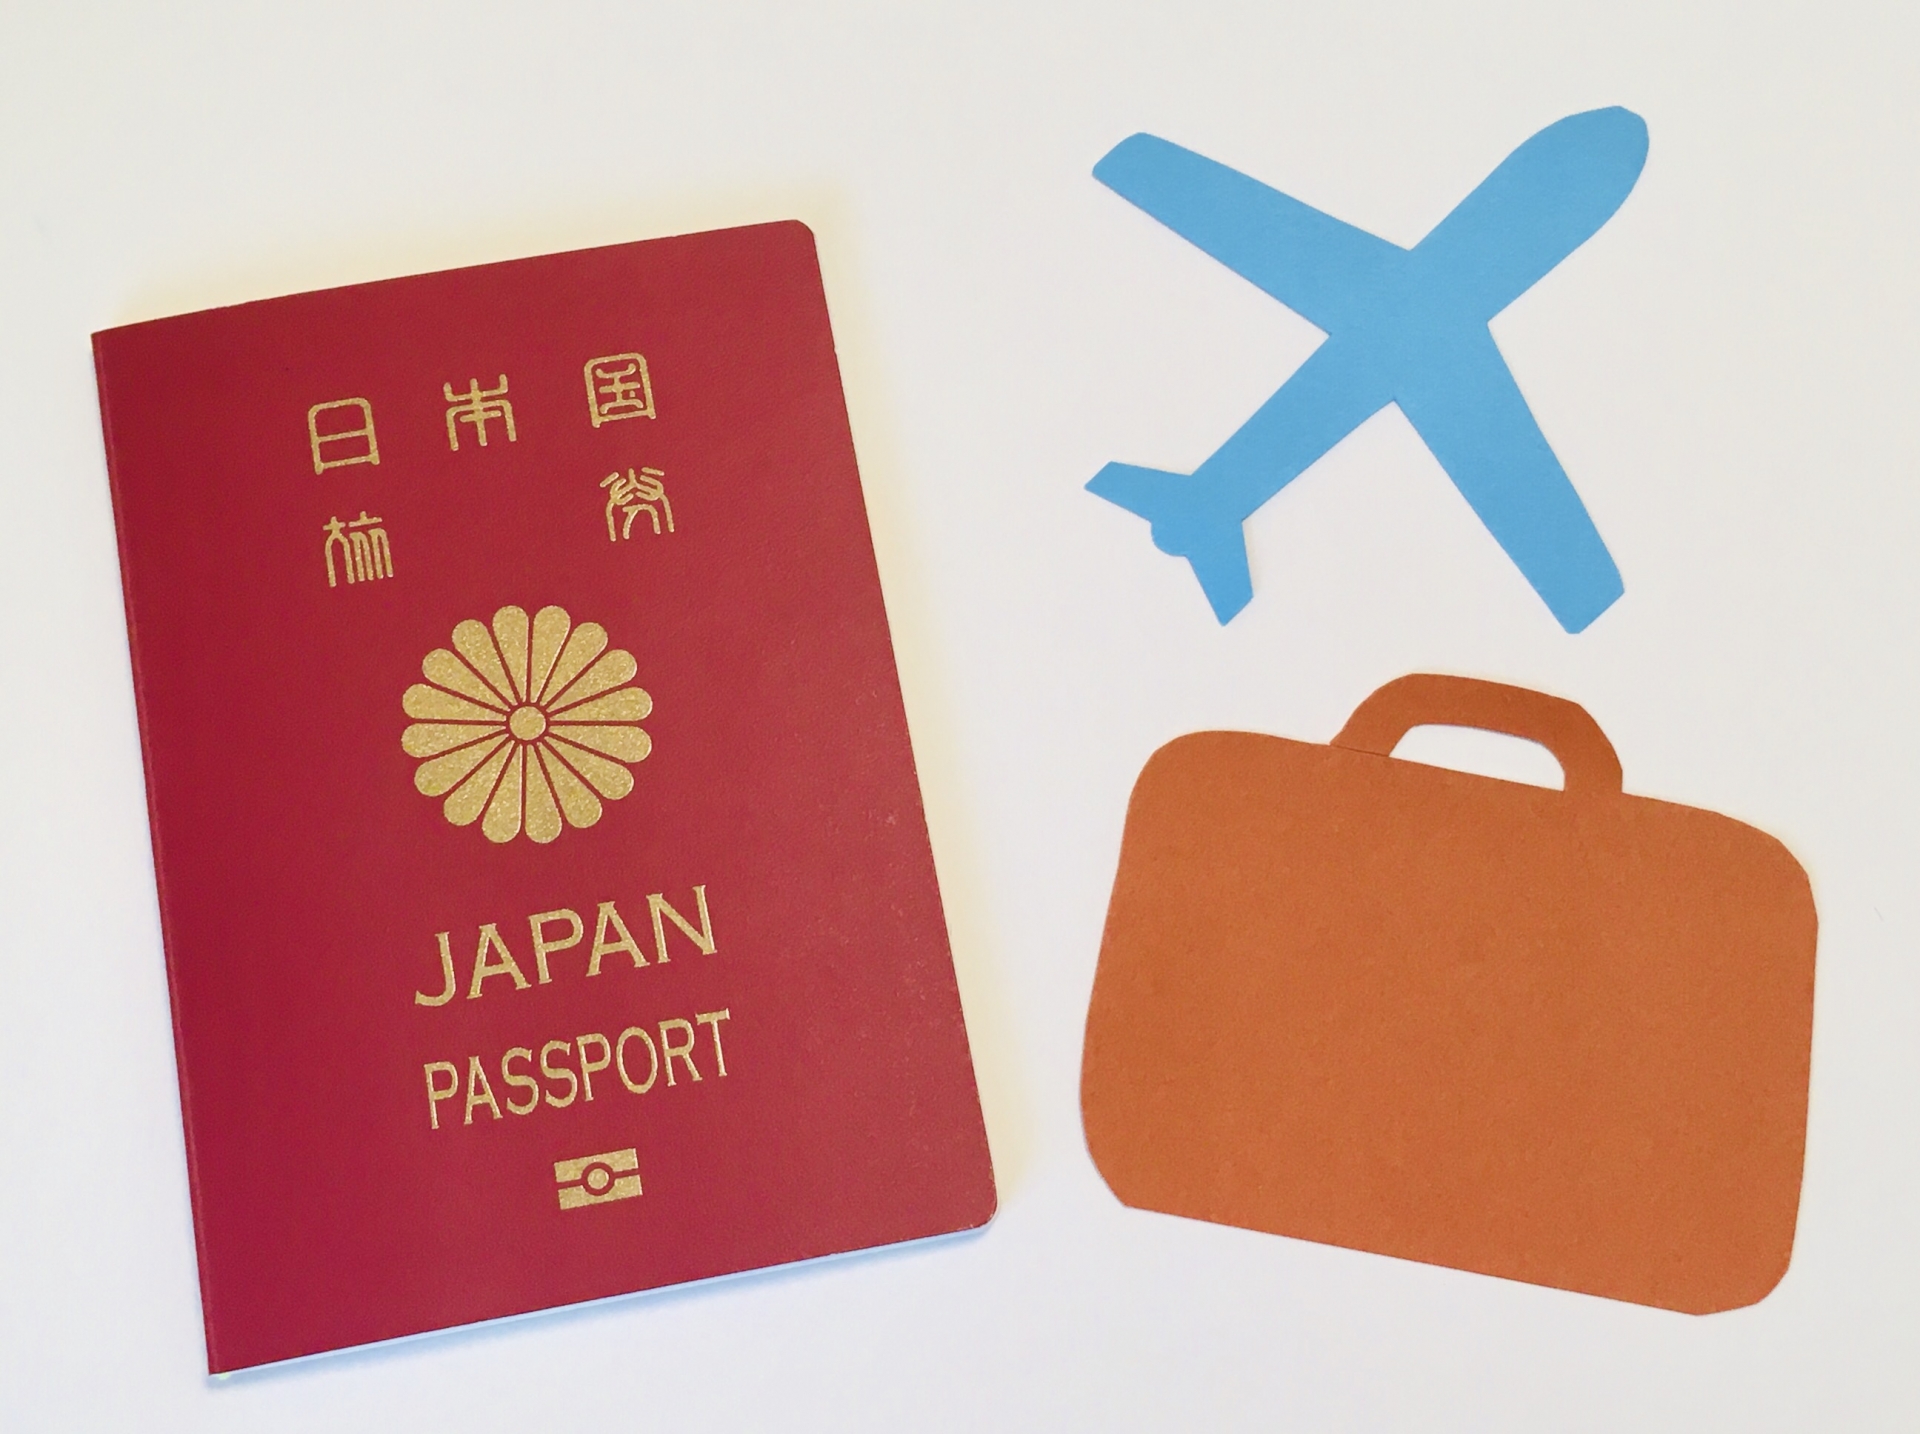 The latest information for traveling Japan